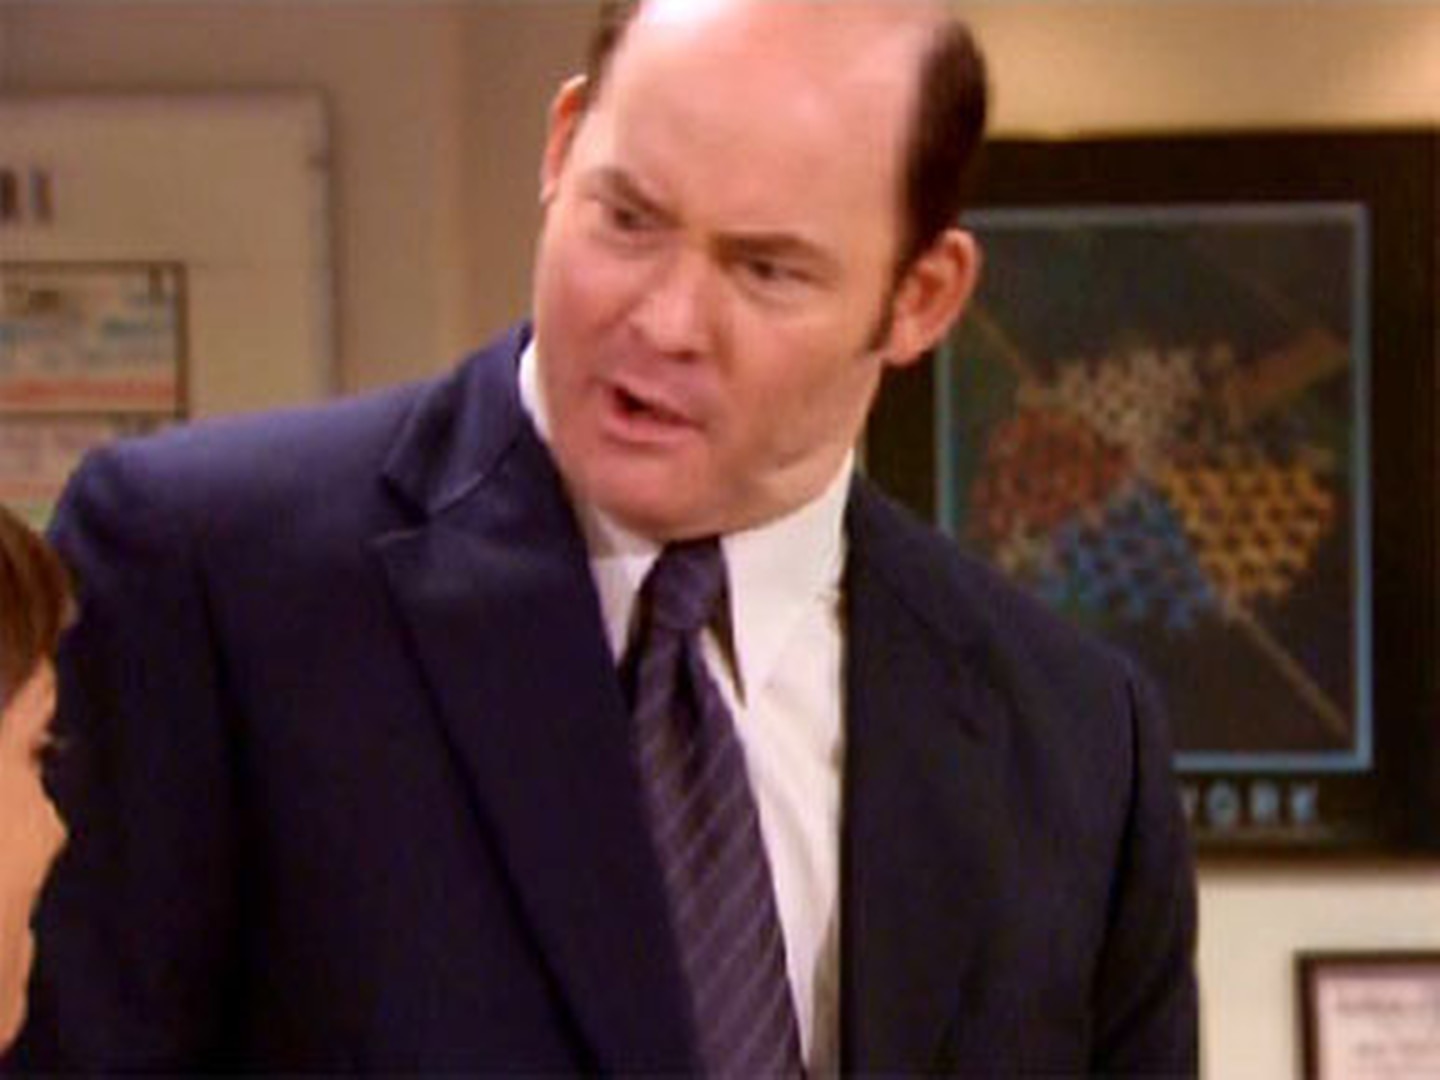 The Office: Todd Packer: Inappropriate Moments Photo: 604291 